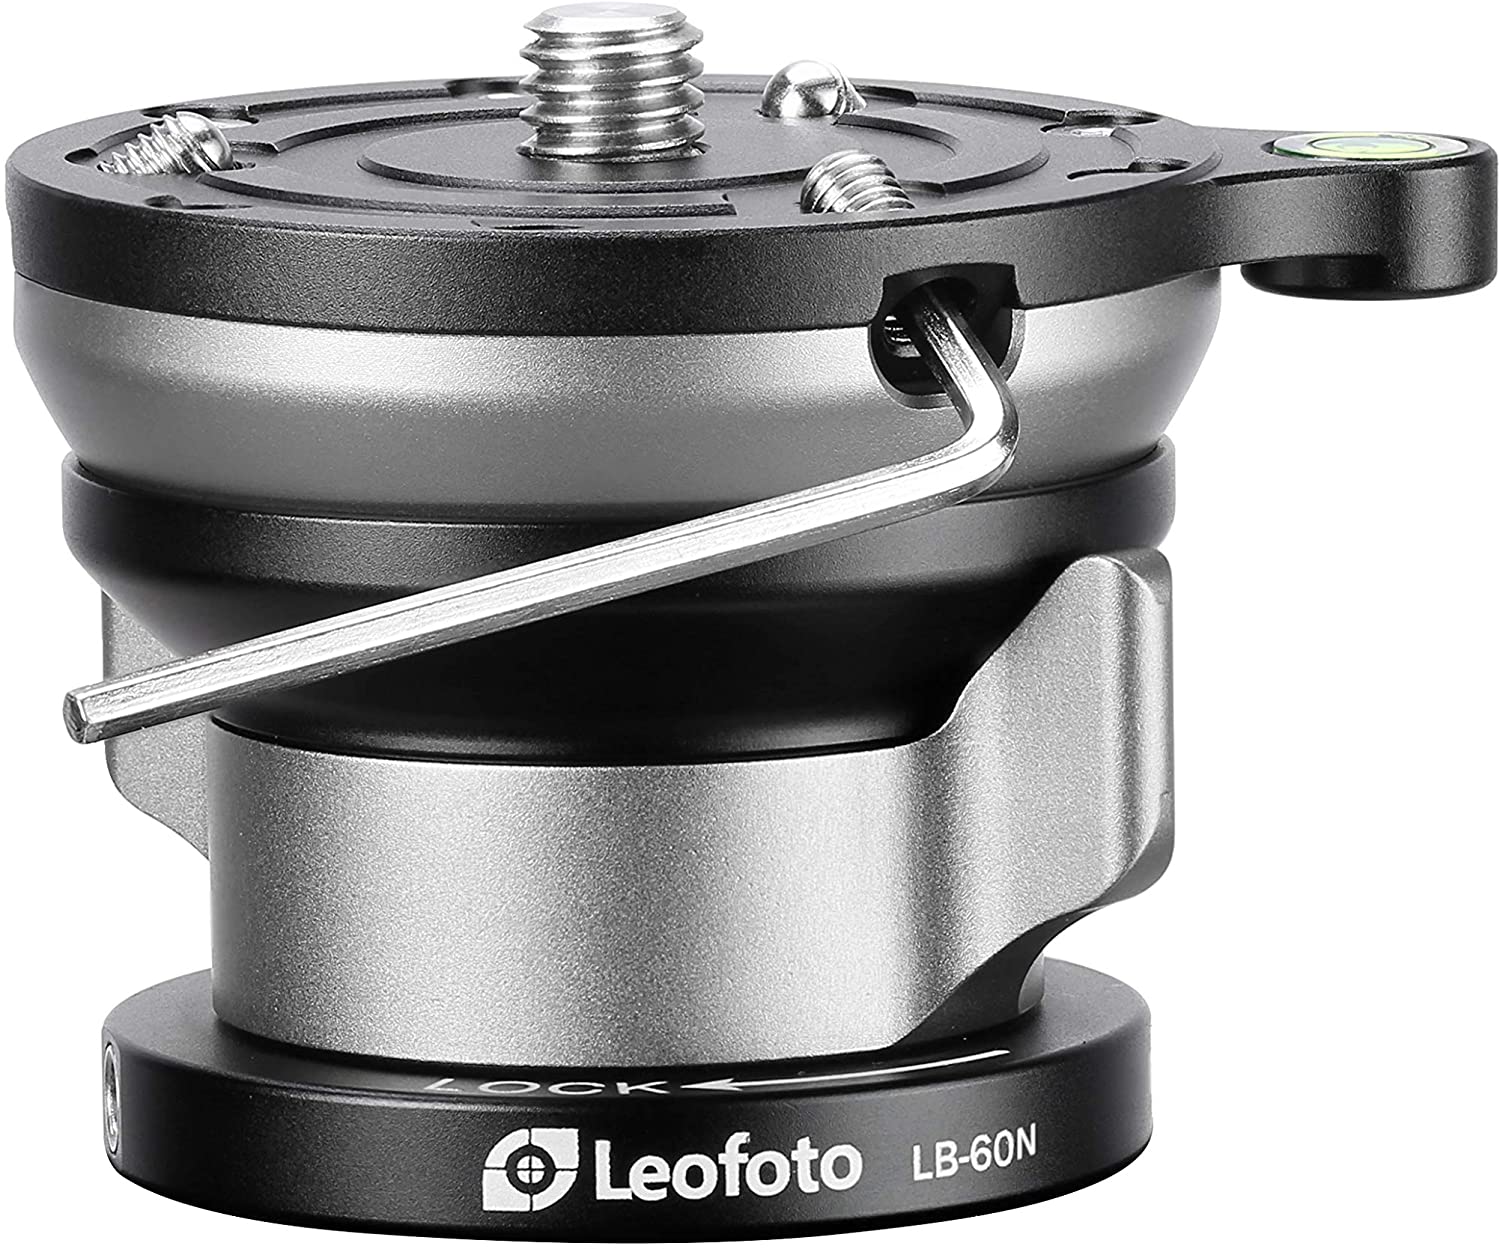 Leofoto LB-60N 60mm Leveling Base with Butterfly Lock